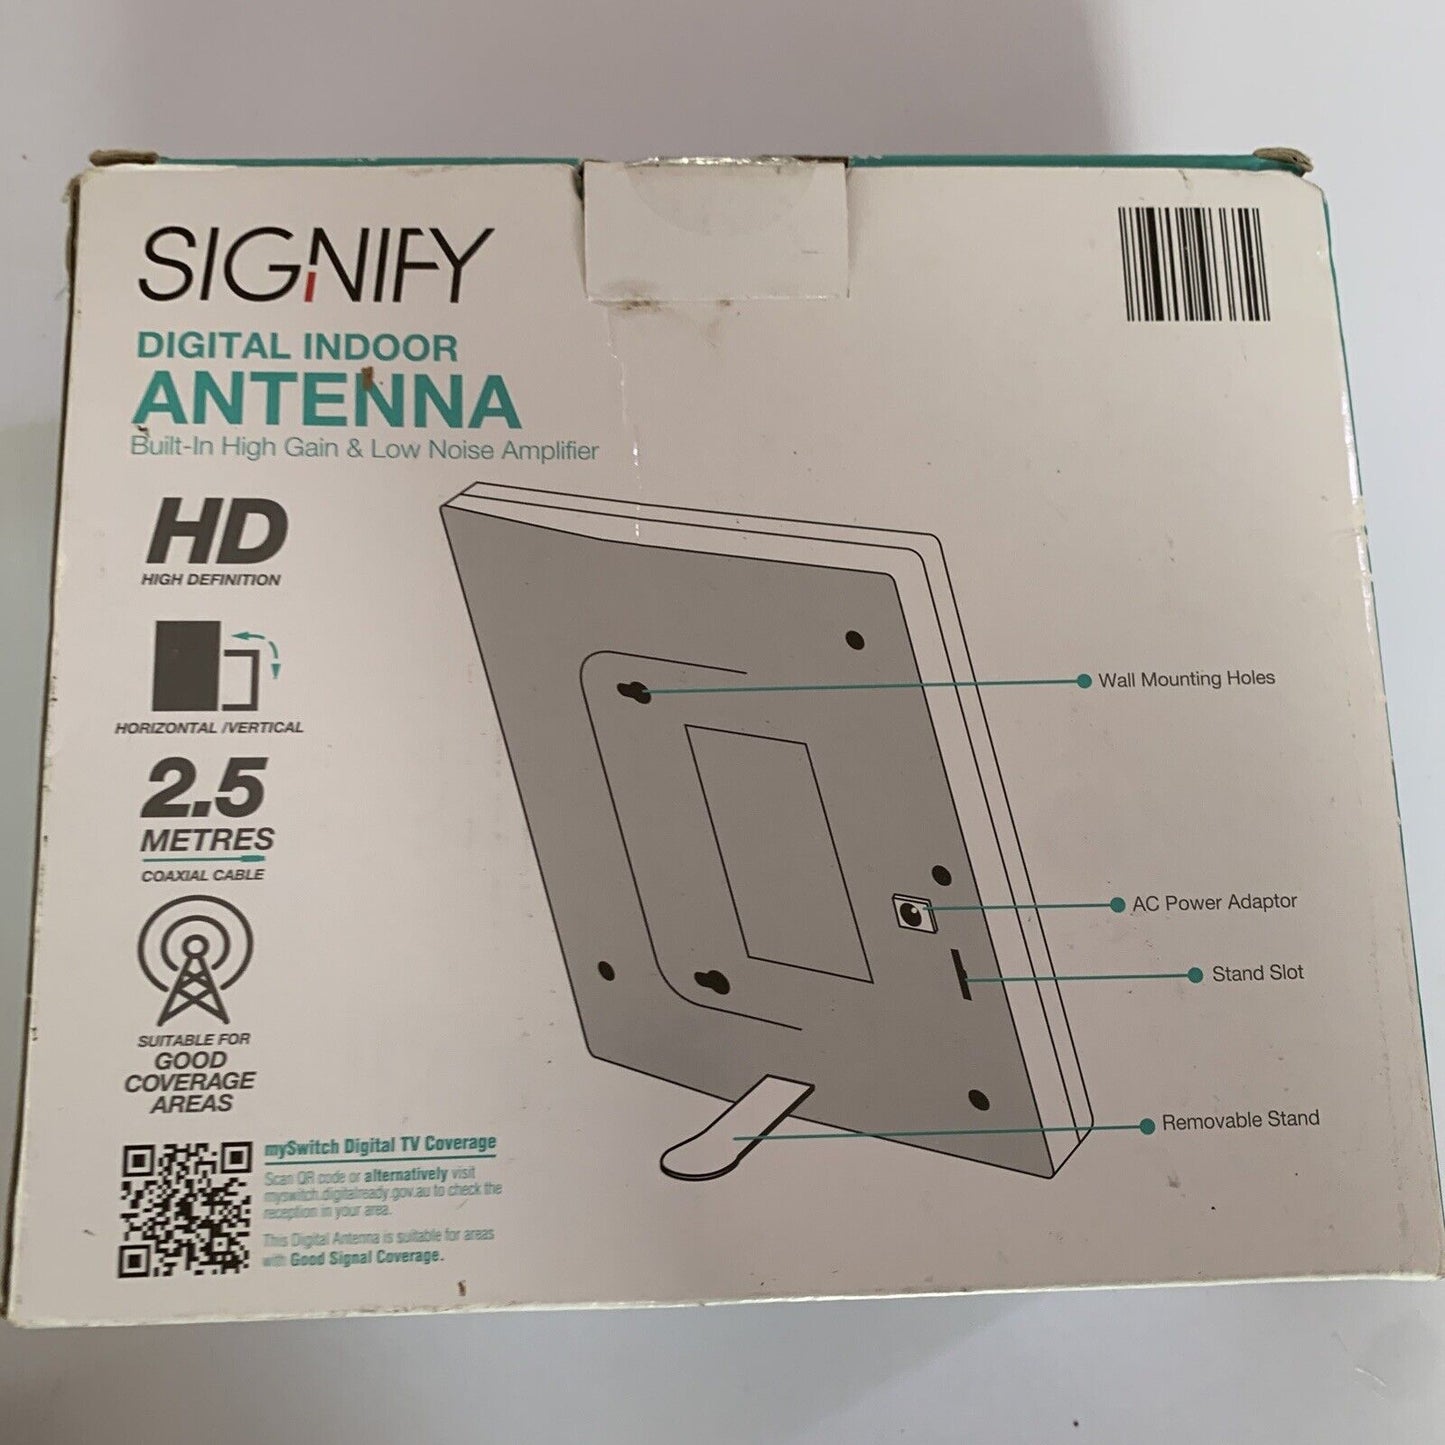 Signify Digital Indoor Antenna Built-in High Gain & Low Noise Amplifier NEW